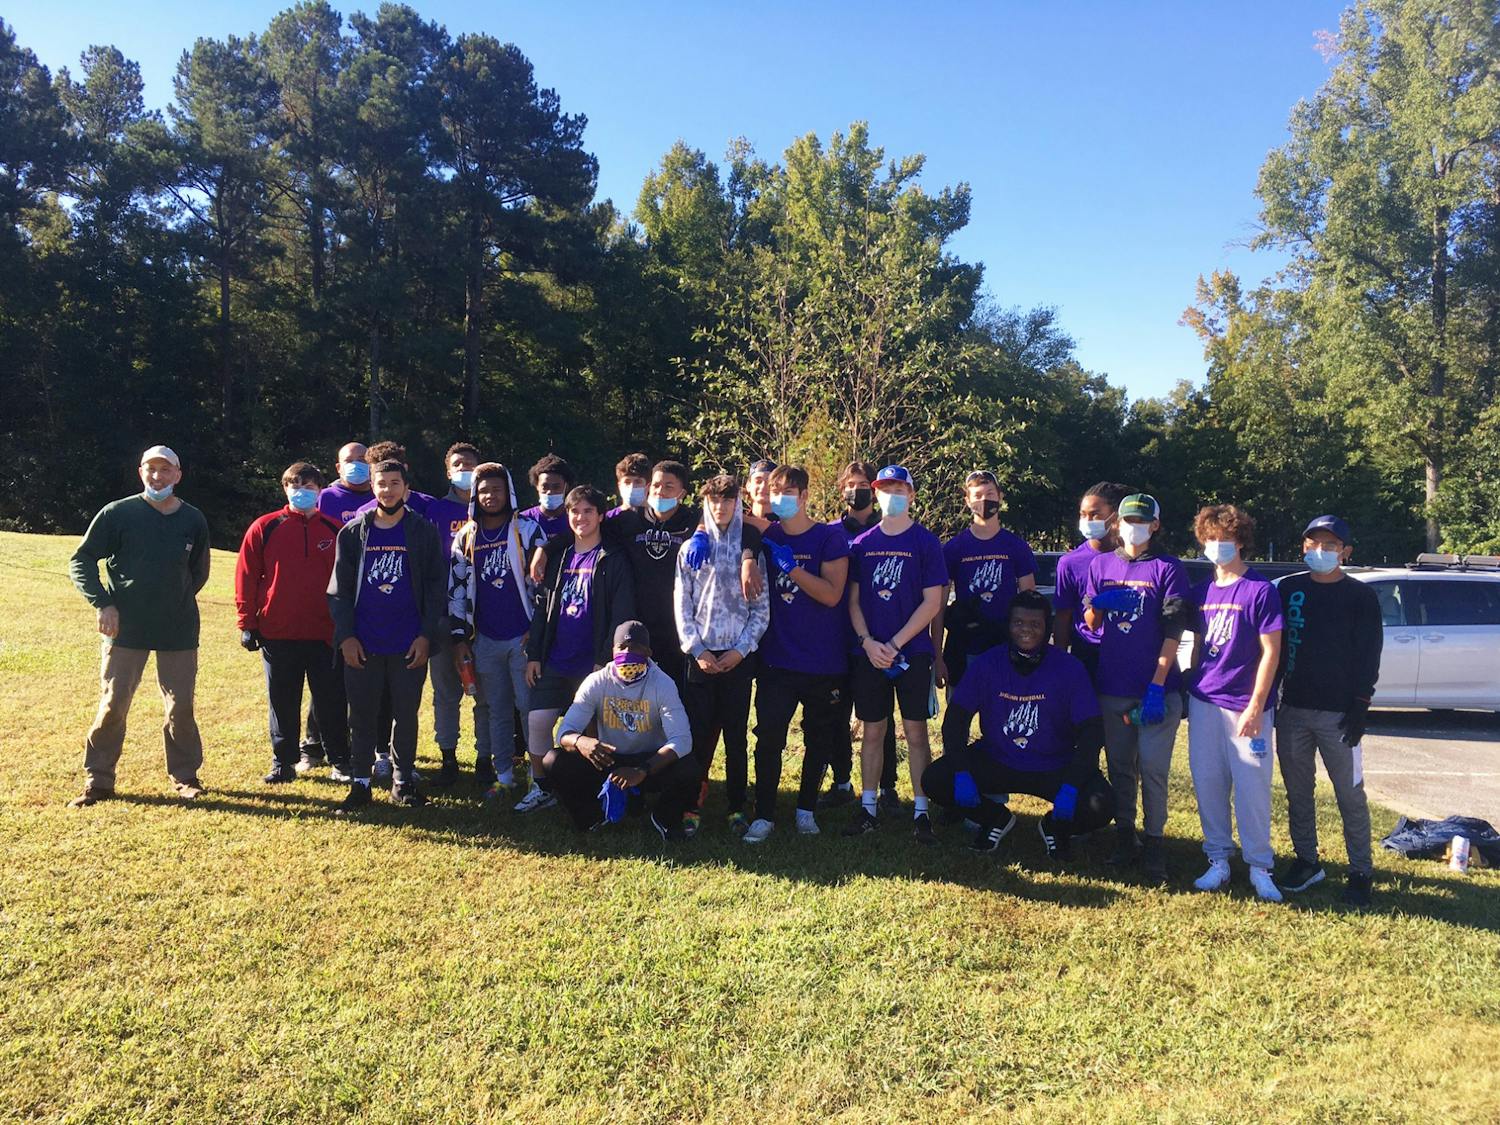 The Carrboro High School Football Team pitched in to remove invasive privet from Anderson Park in fall 2021. Photo courtesy of Catherine Lazorko/Town of Carrboro